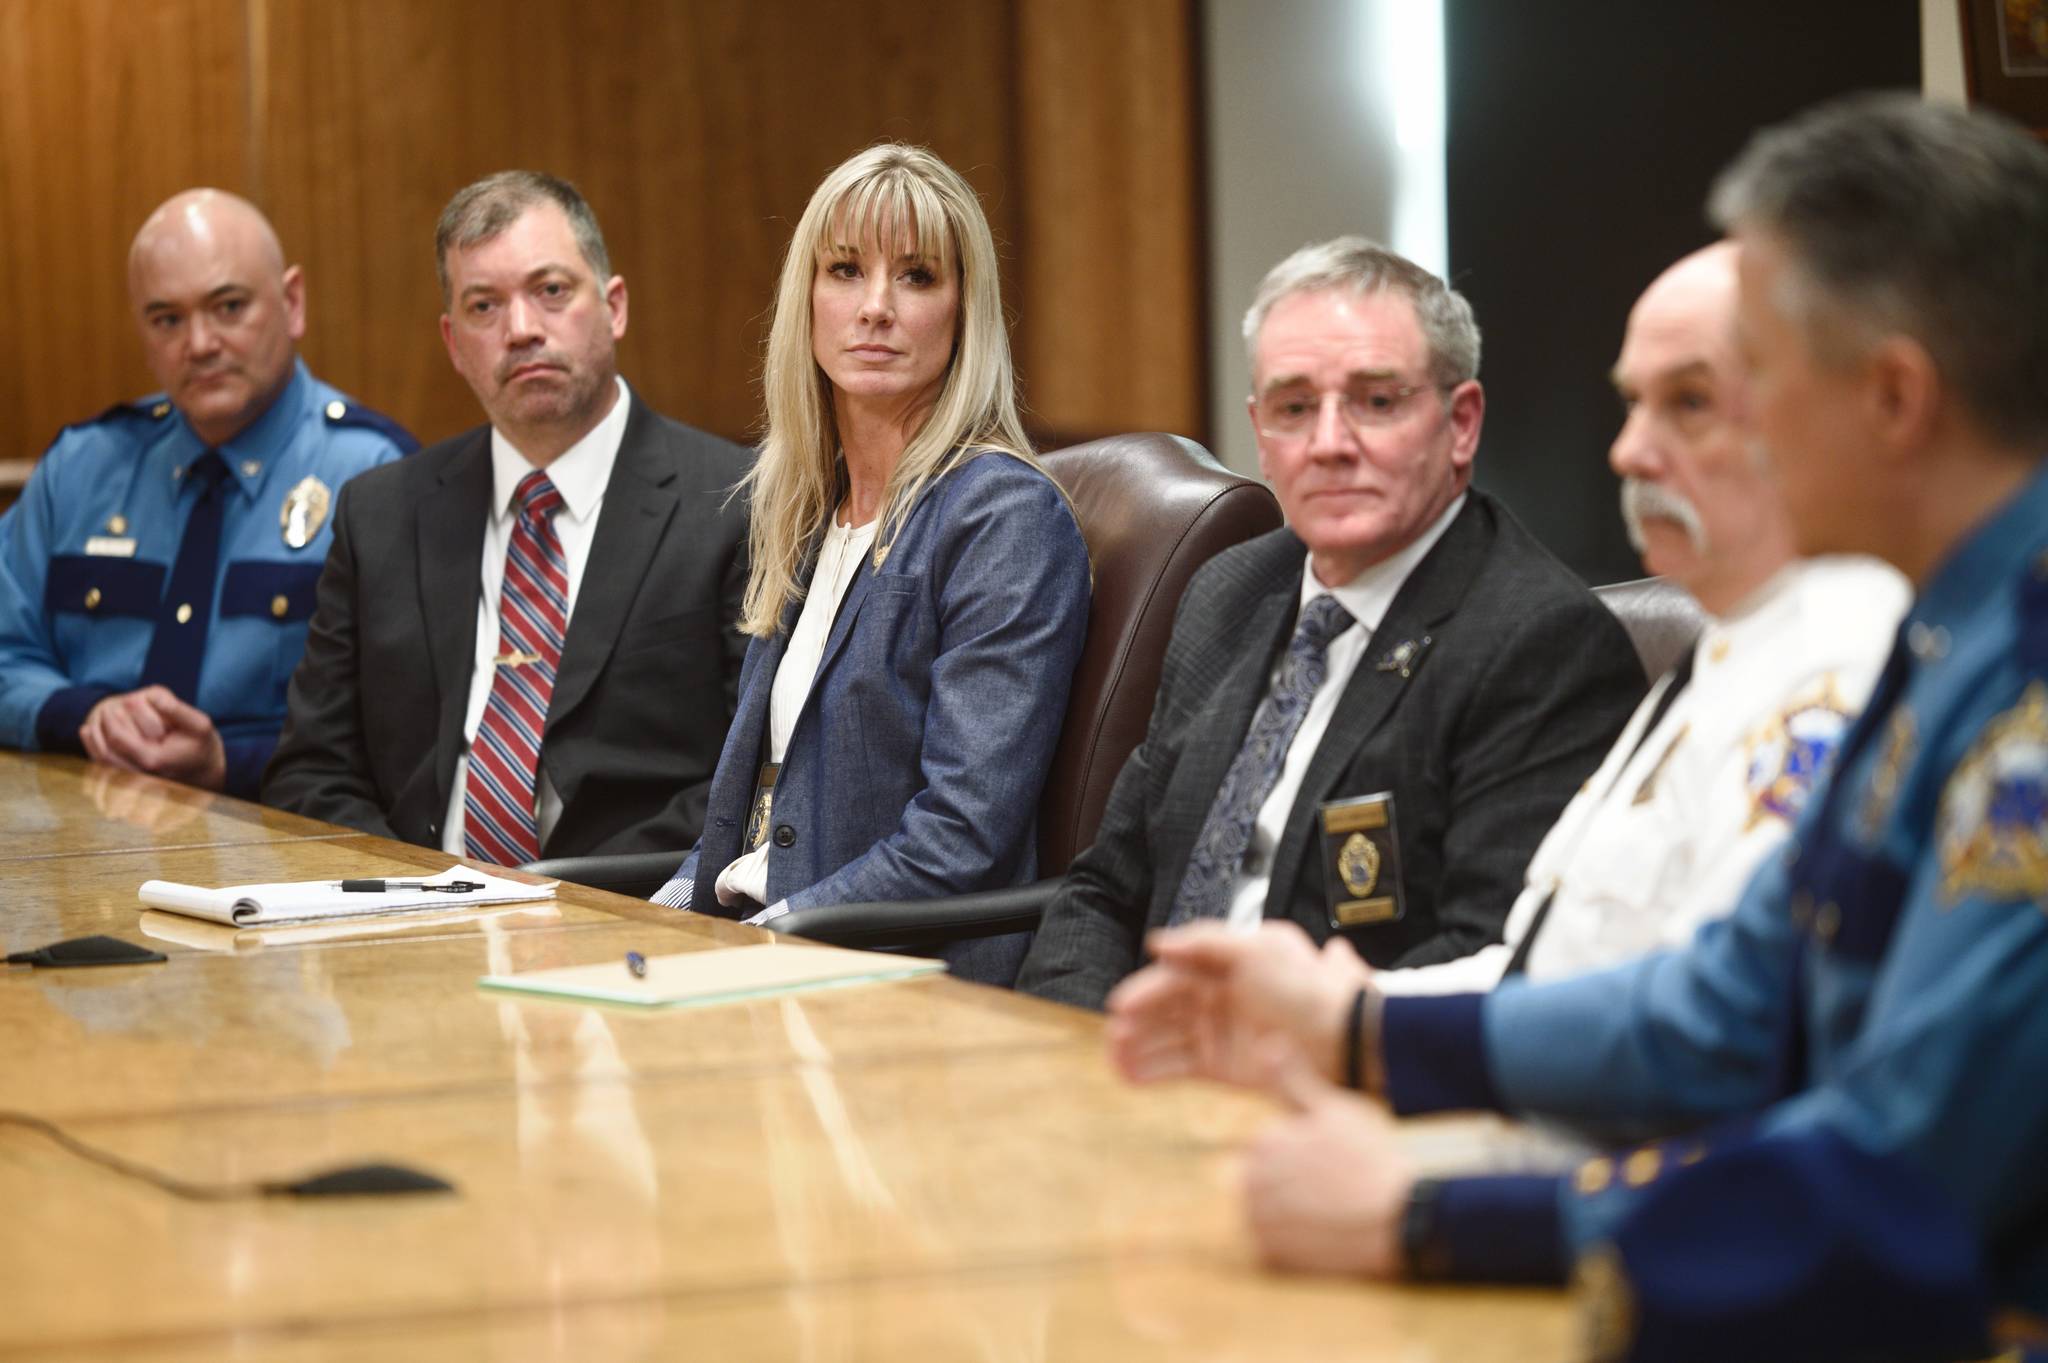 Amanda Price, commissioner of the Department of Public Safety, is surrounded by Department of Public Safety officials during a press conference on her confirmation to the position at the Capitol on April 16, 2019.
Michael Penn / Juneau Empire File